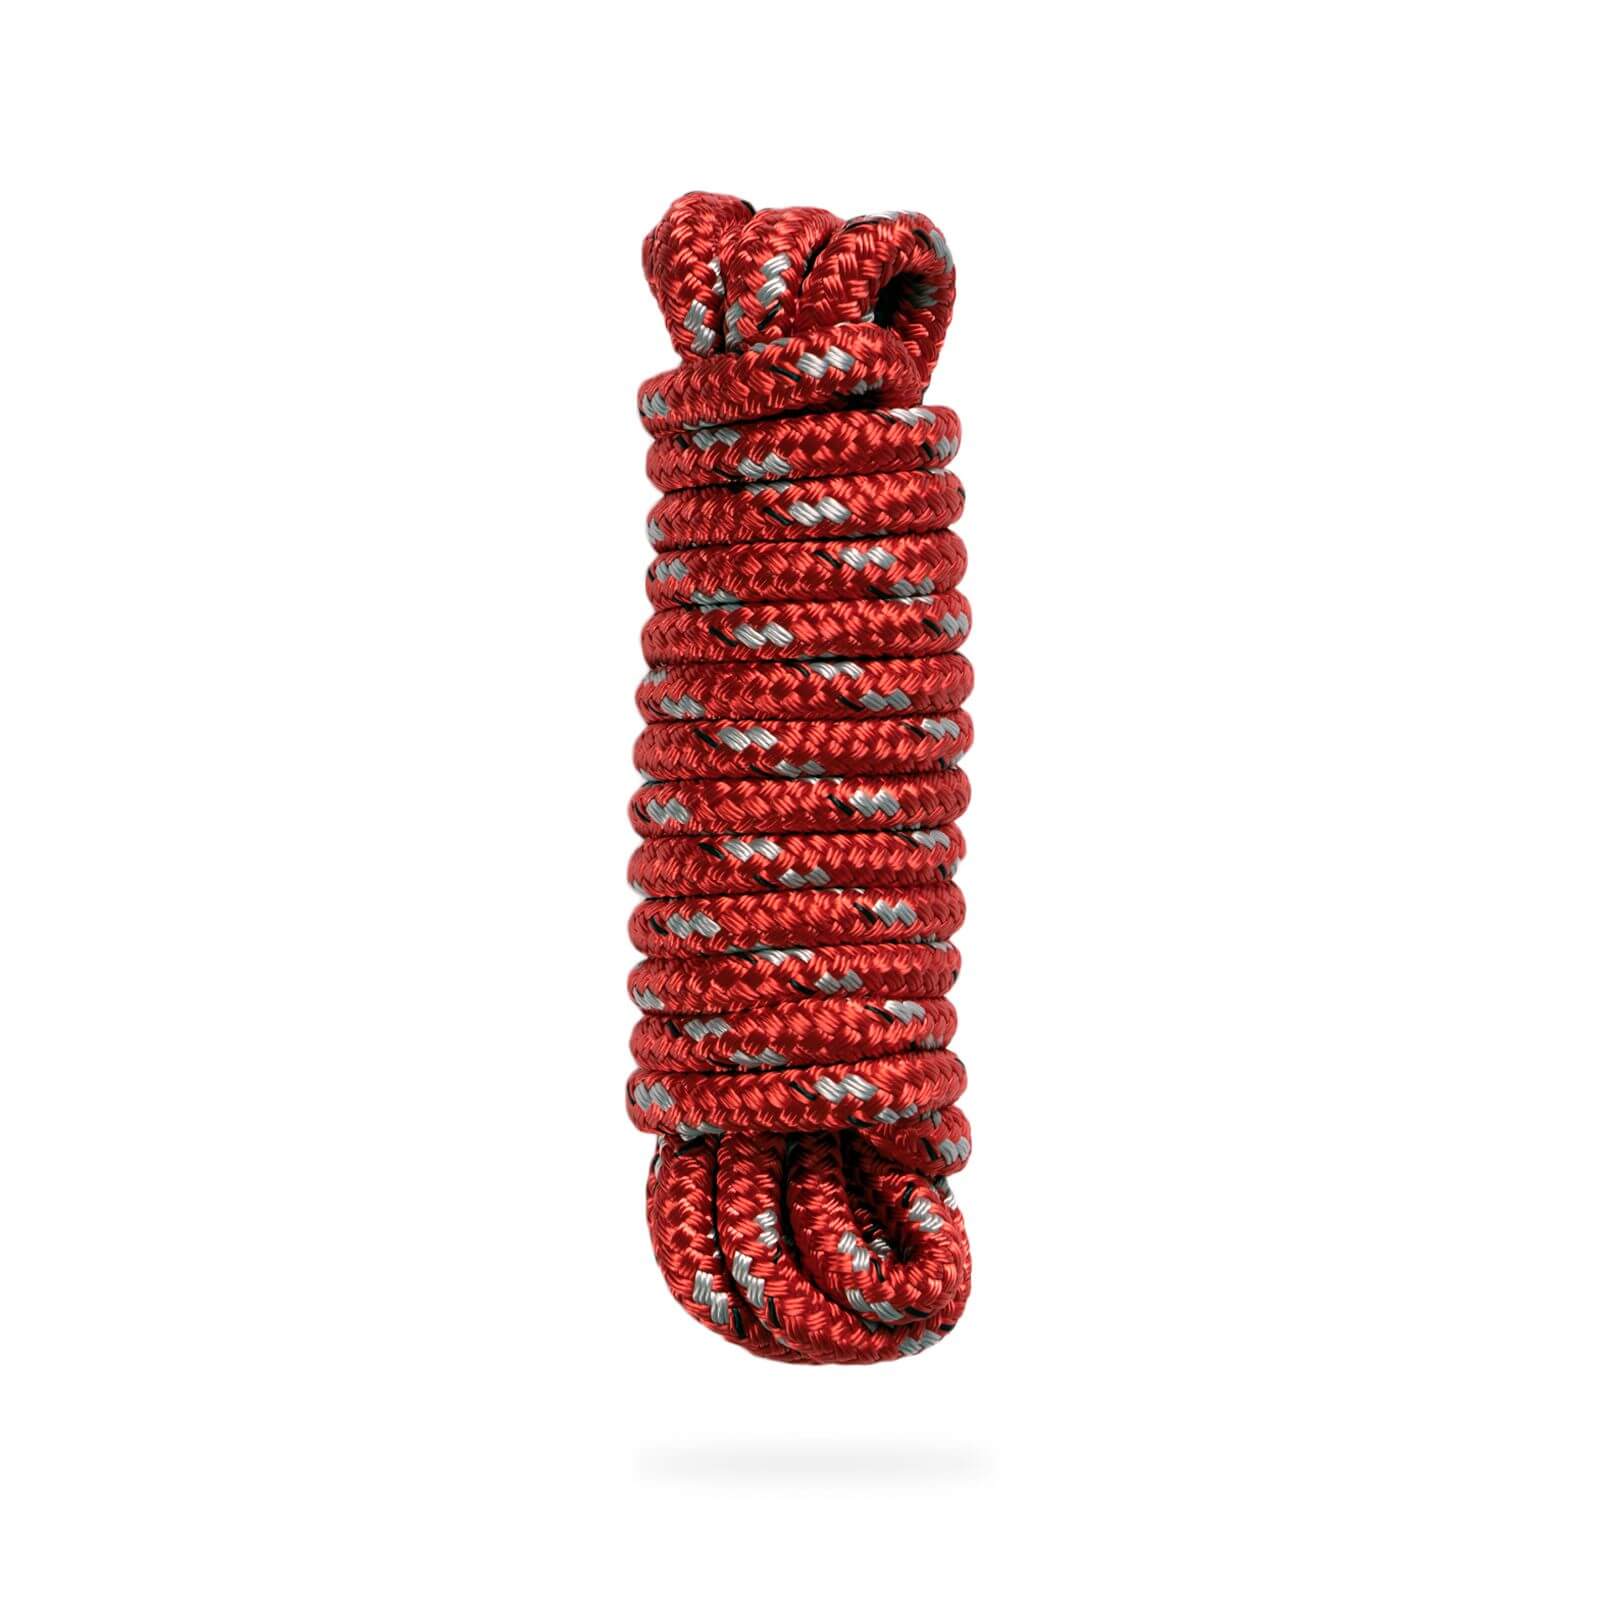 A high strength, double braided Mission Dock Lines rope on a white background.